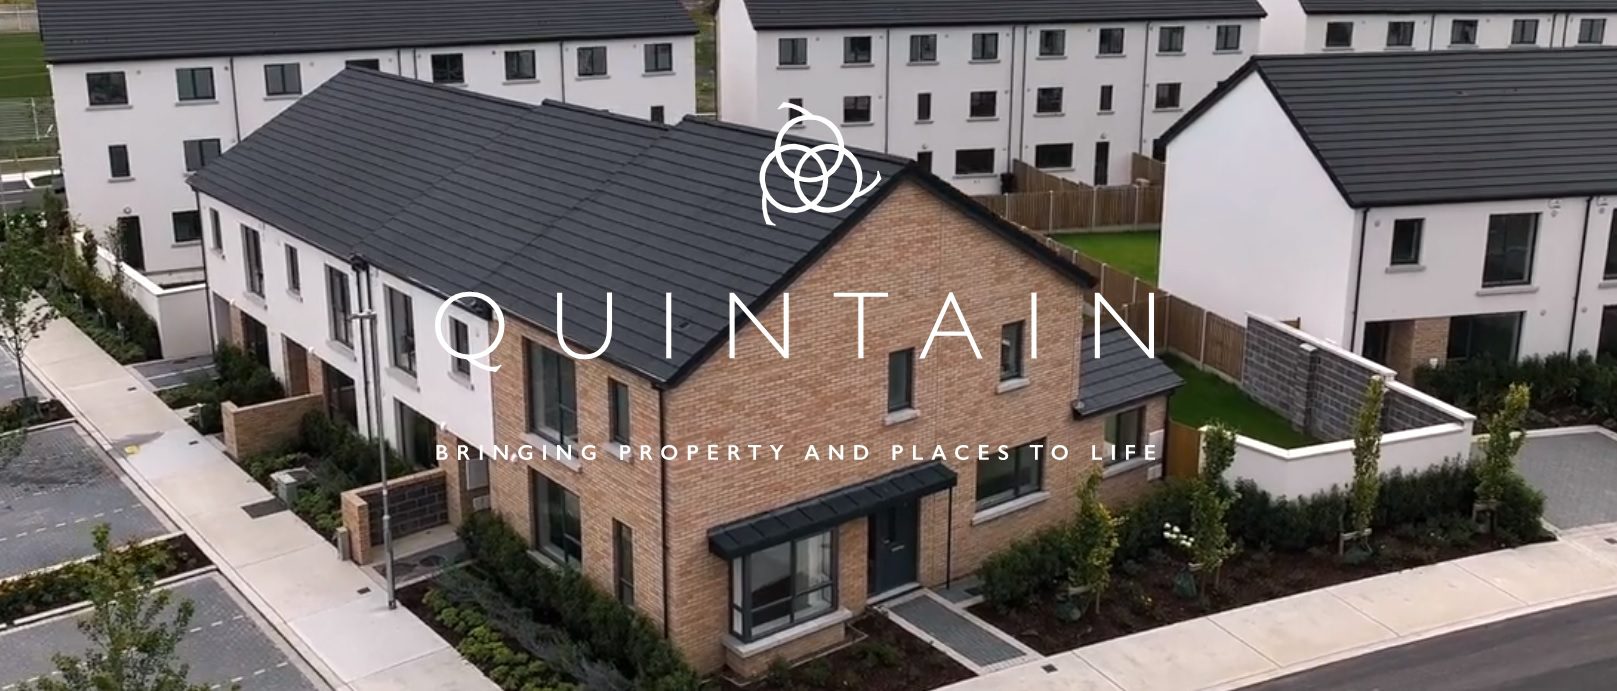 Dynamics 365 Business Central Success Story with Quintain